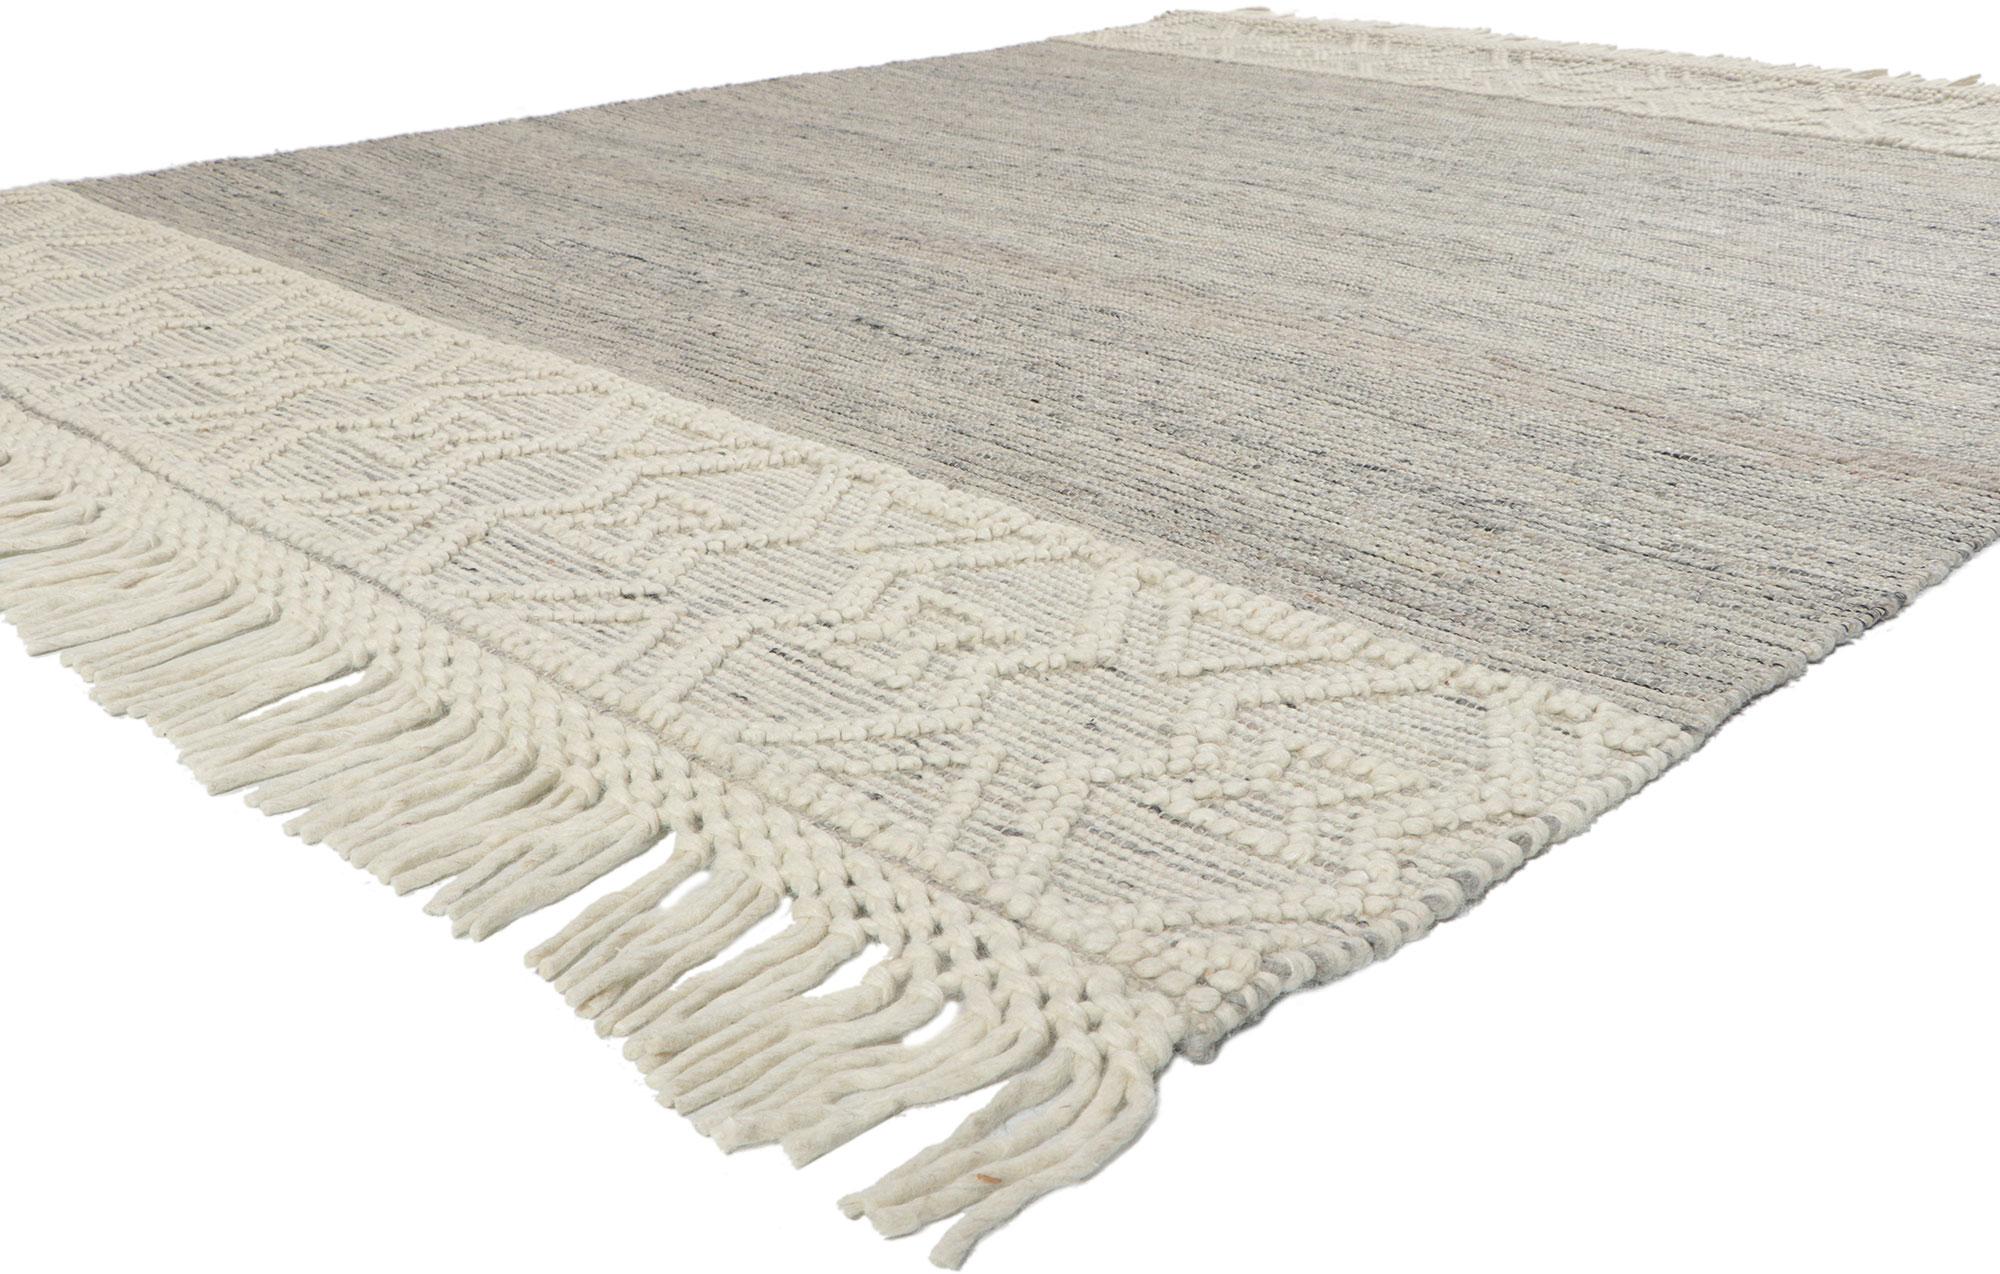 30900 New Handwoven Textured Jute Rug, 08'04 x 10'04.
?Emanating bohemian vibes with incredible detail and texture, this handwoven jute rug is a captivating vision of woven beauty. The genteel design and charming colorway woven into this piece work